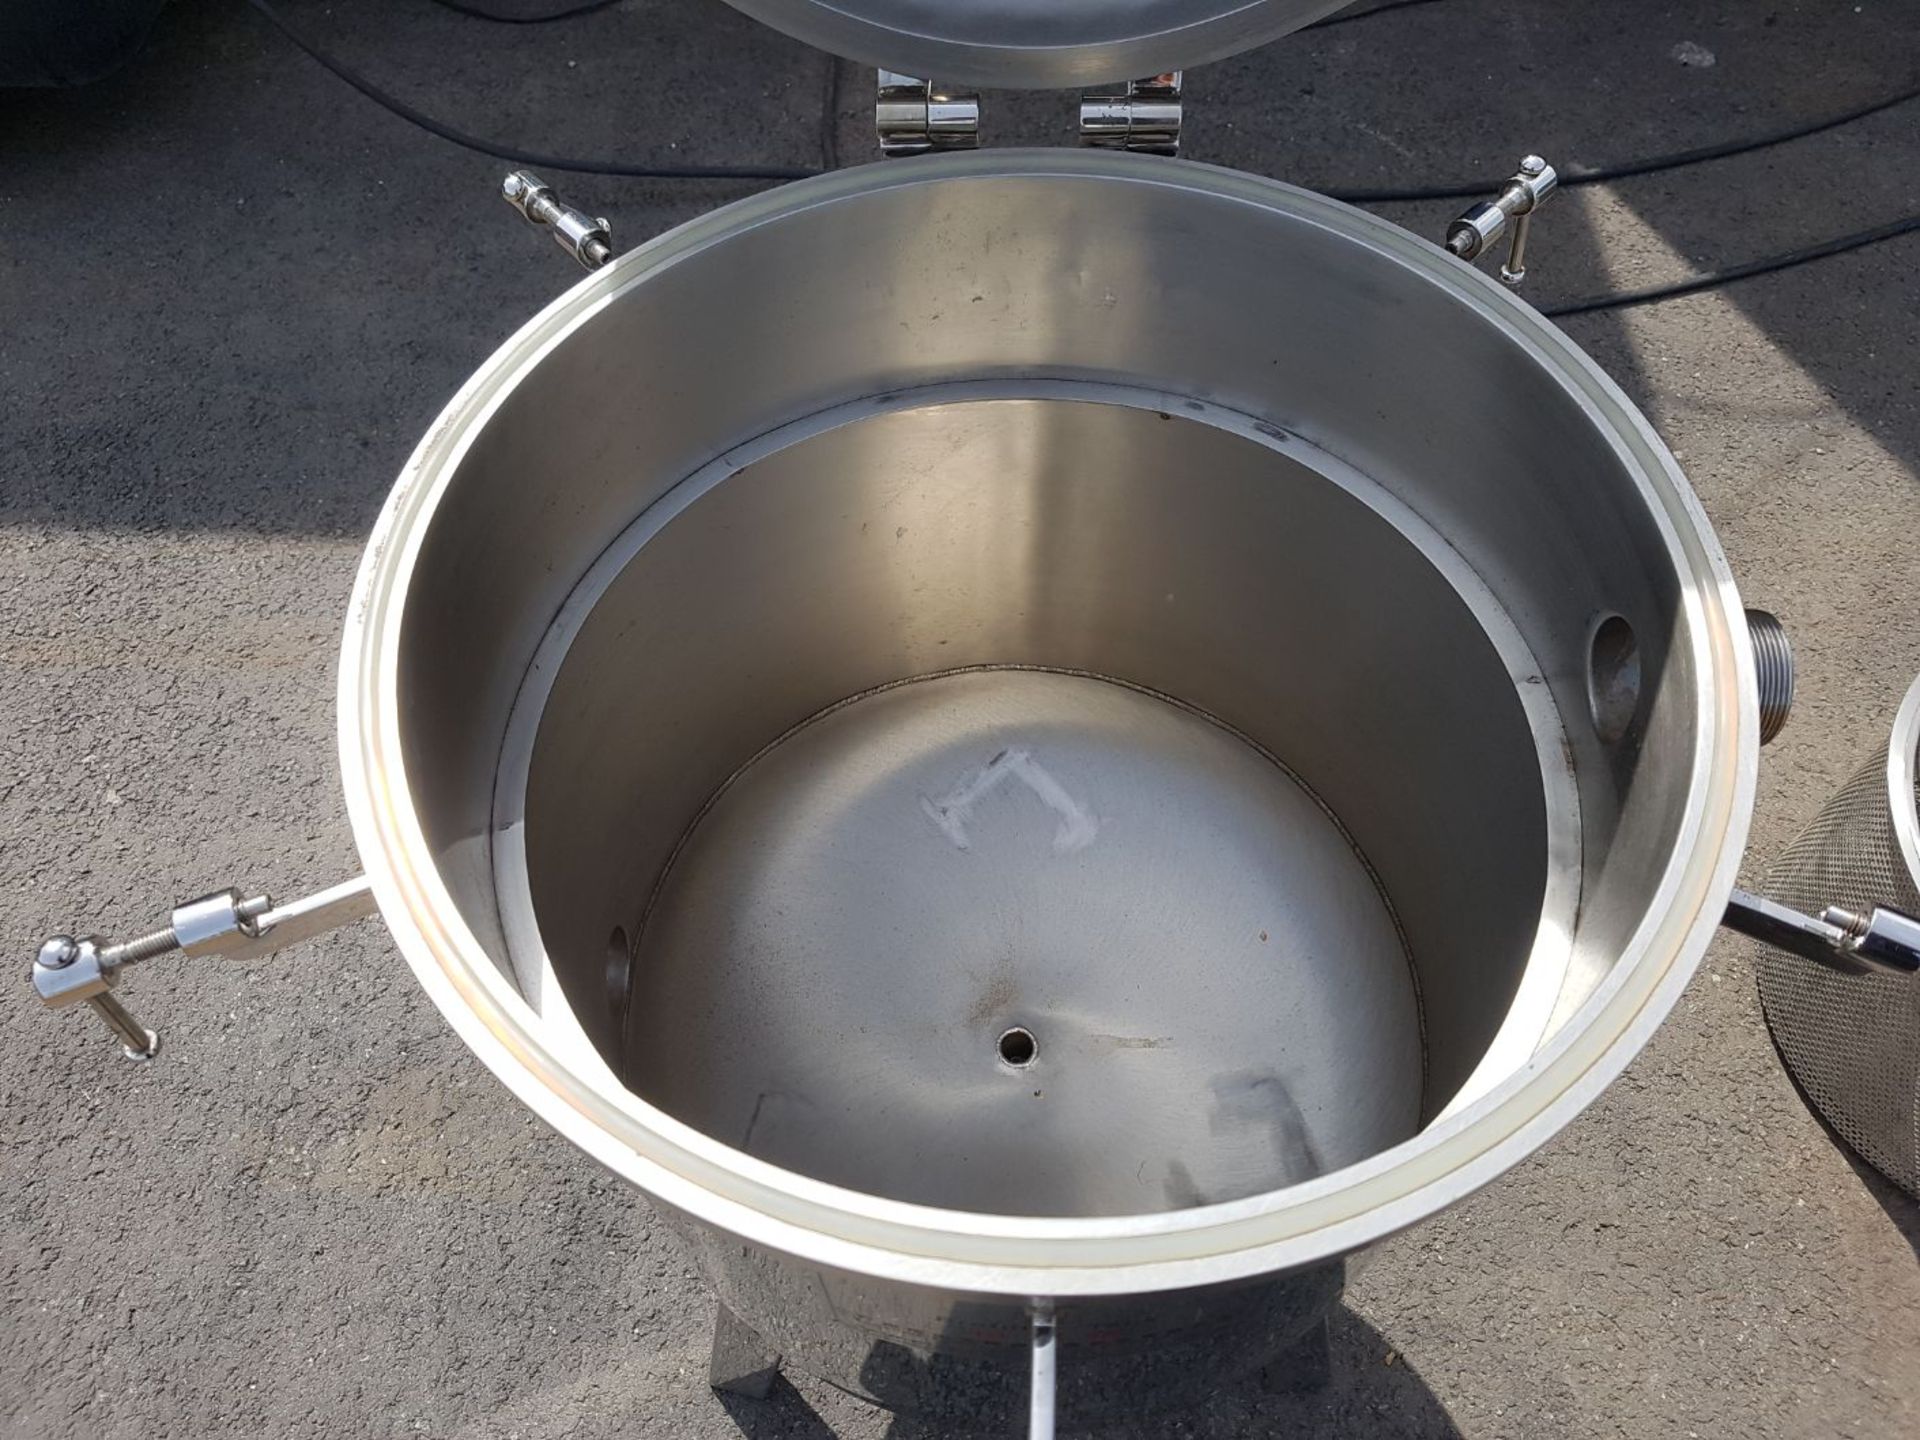 1 x brand new resim impregnation stainless steel tank vacuum tank with basket filter support - Image 3 of 10